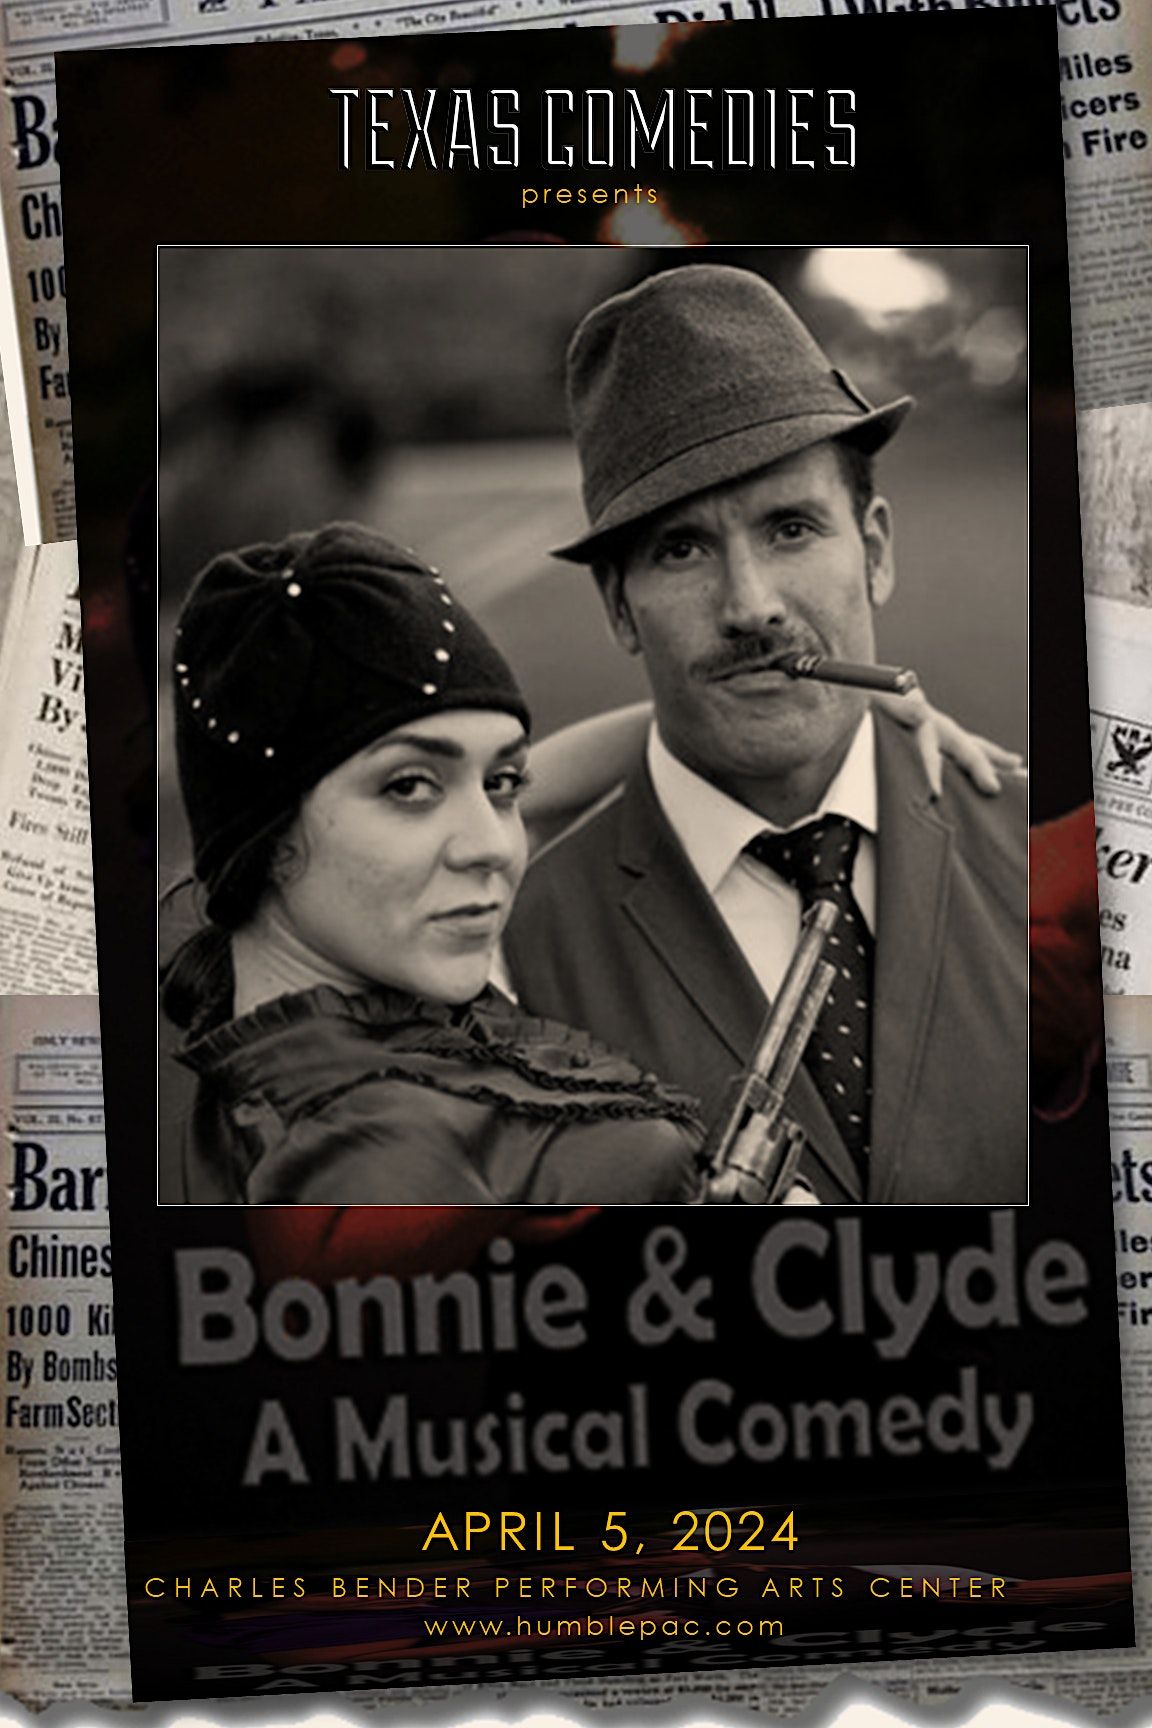 BONNIE AND CLYDE MUSICAL COMEDY